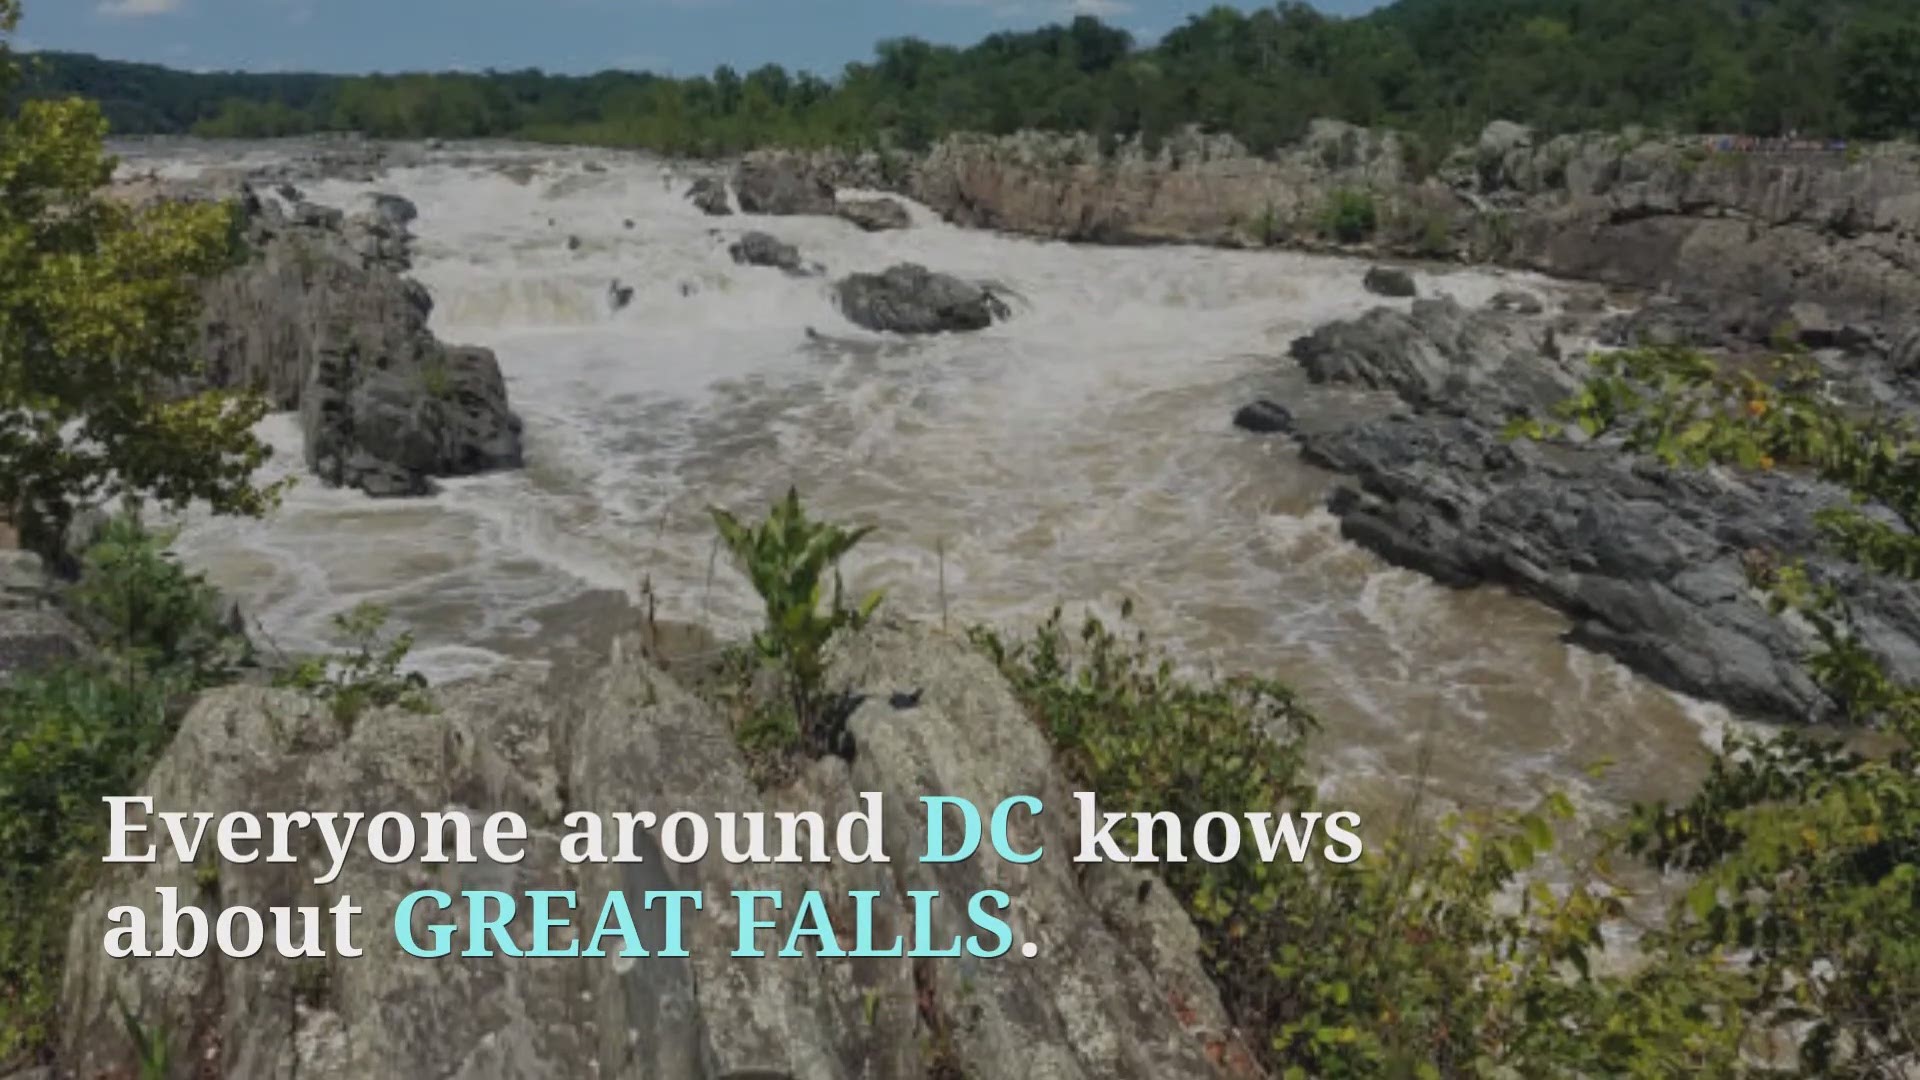 Everyone around DC knows about GREAT FALLS.
But have you heard of the LITTLE FALLS? 
Located 5 miles south of Great Falls, the lesser falls have a long history.